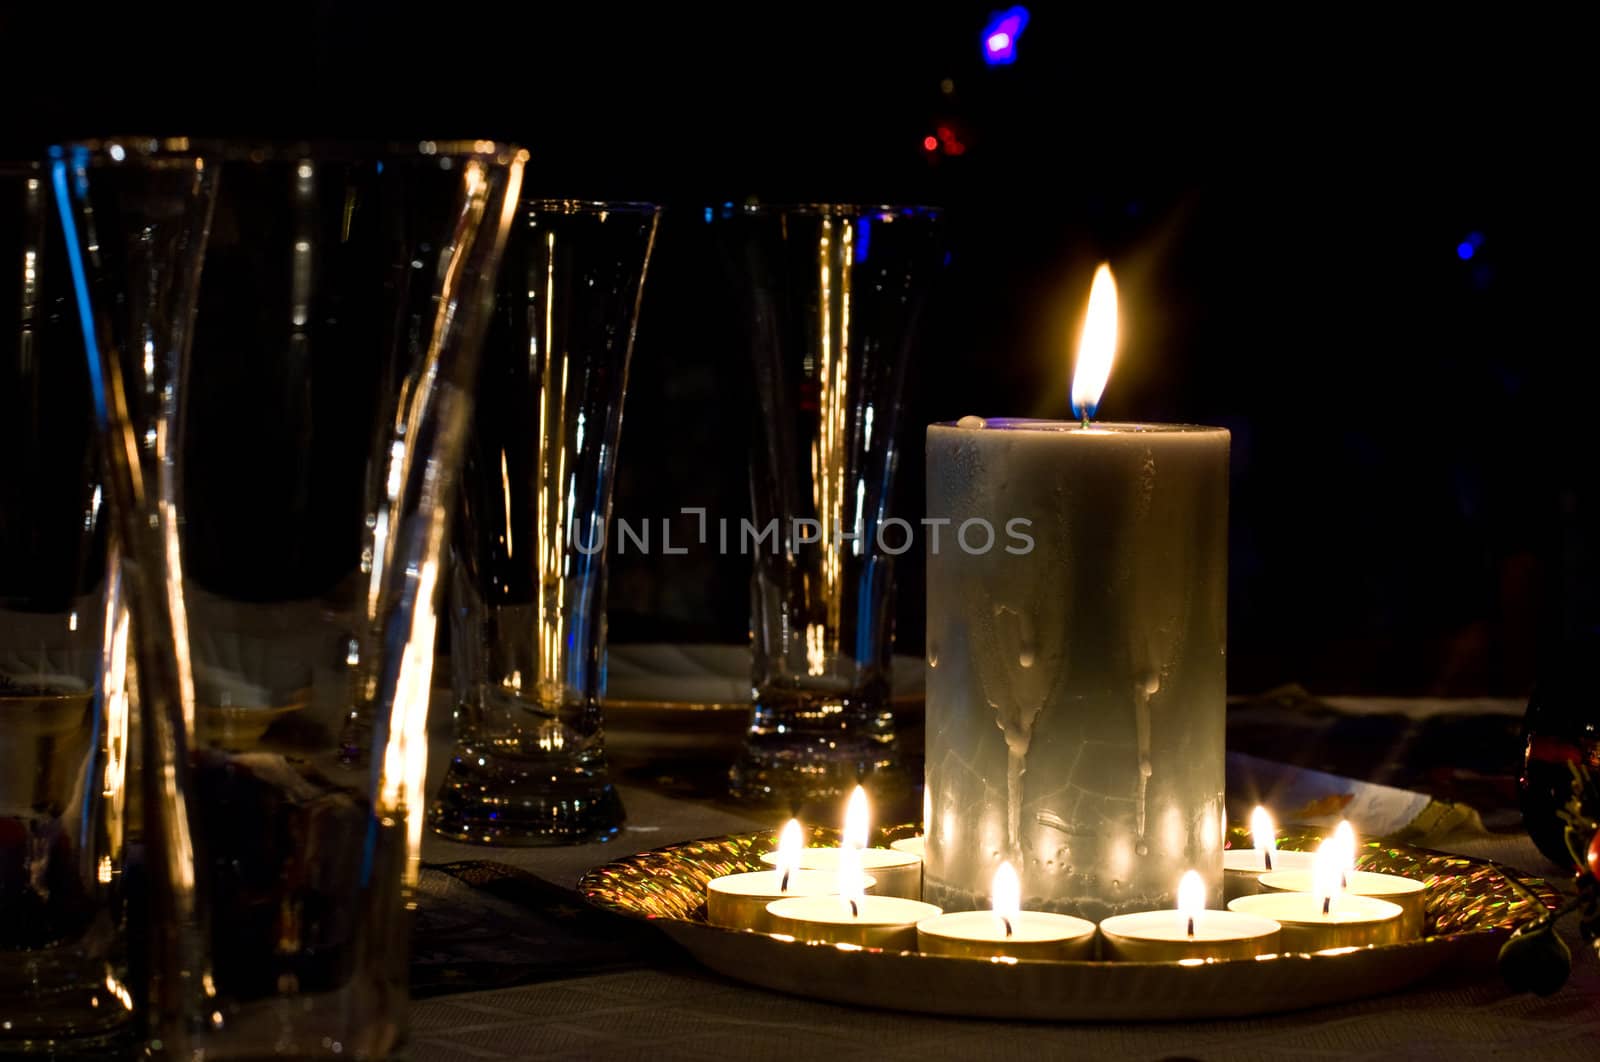 Glasses and burning candles on a table against a black background